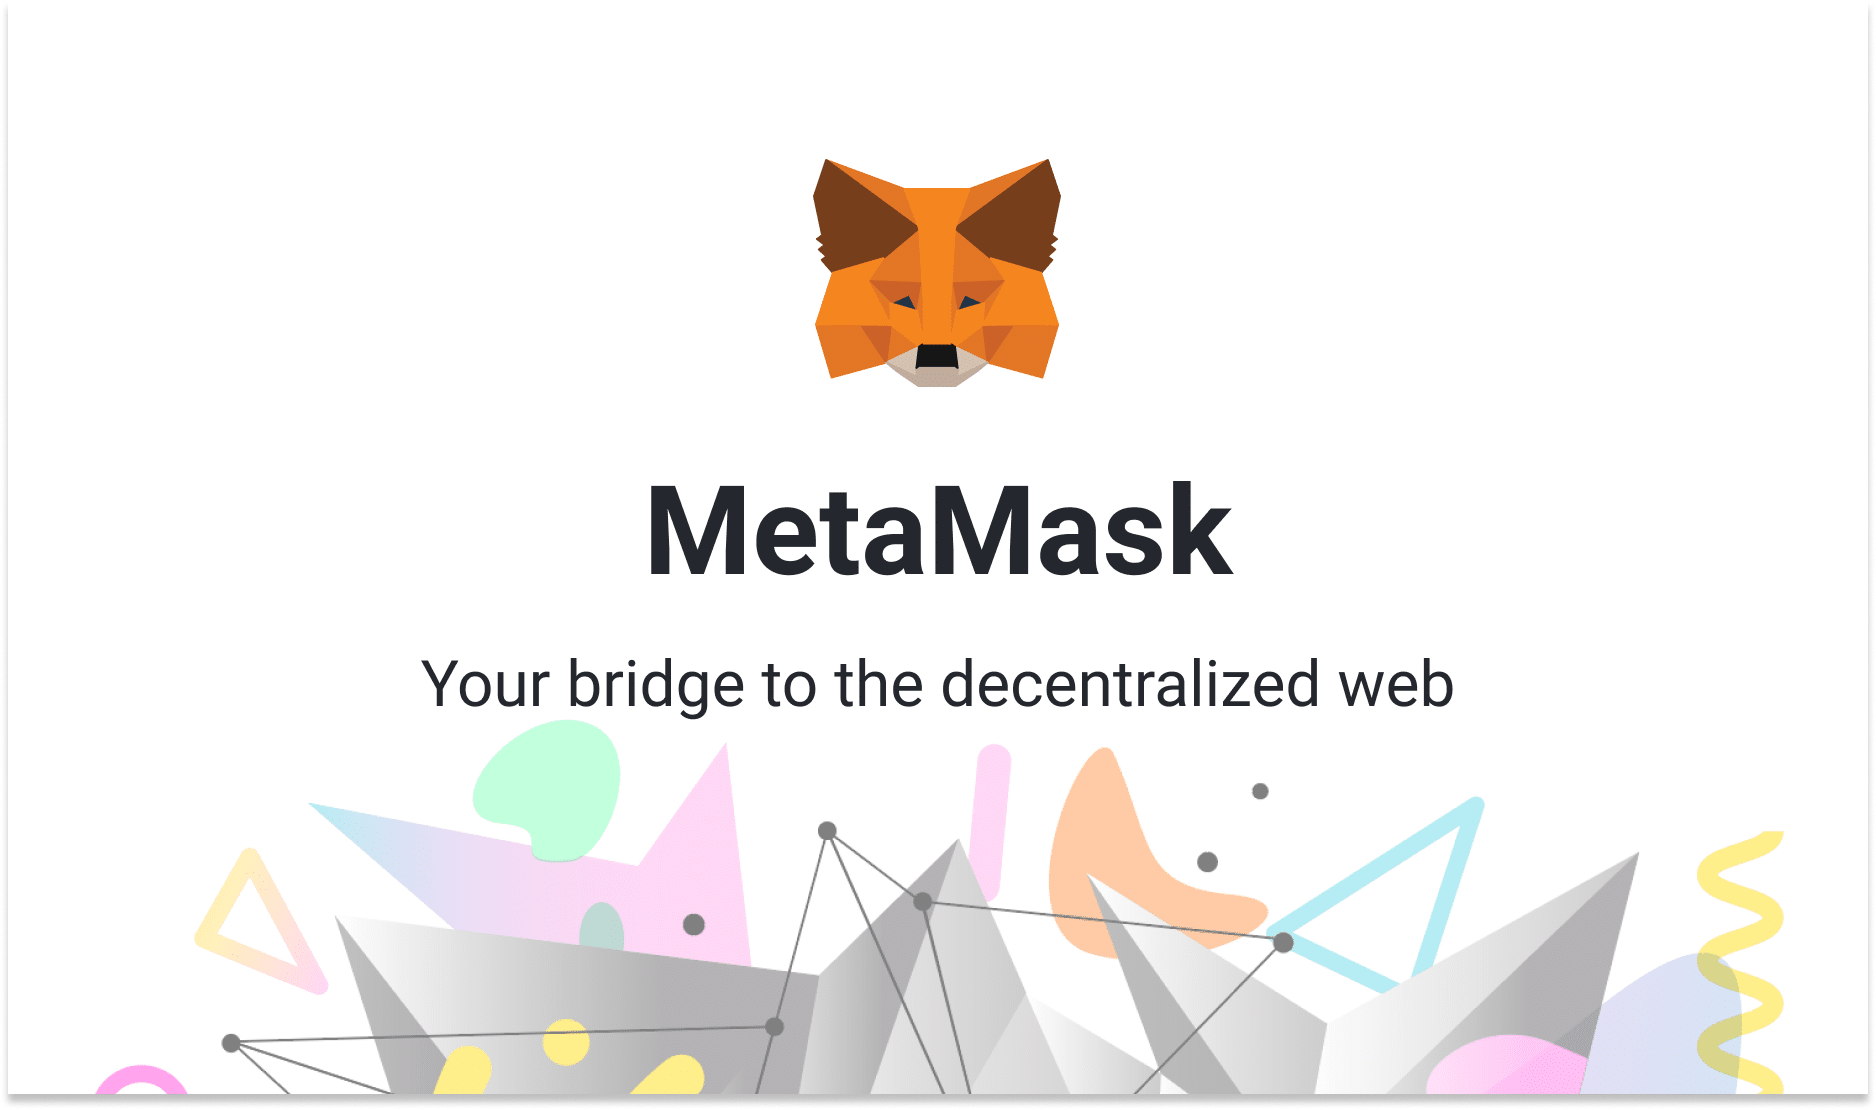 image of the metamask logo of a fox nft